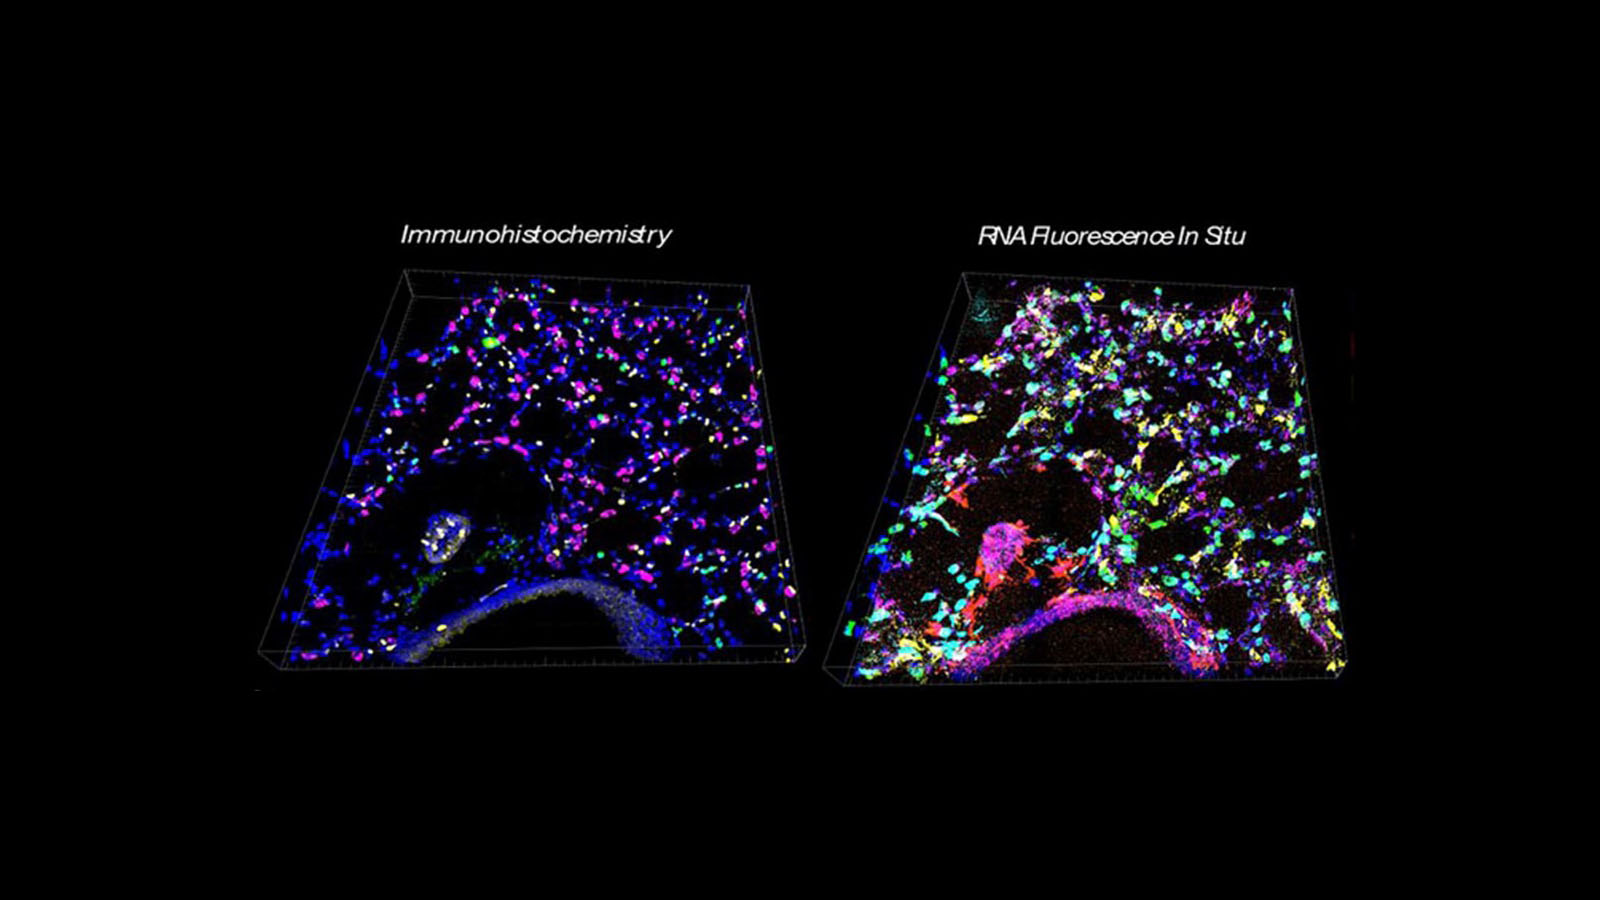 IHC and RNA fluorescence images of mouse lung, courtesy of Peter Chou at Stanford University